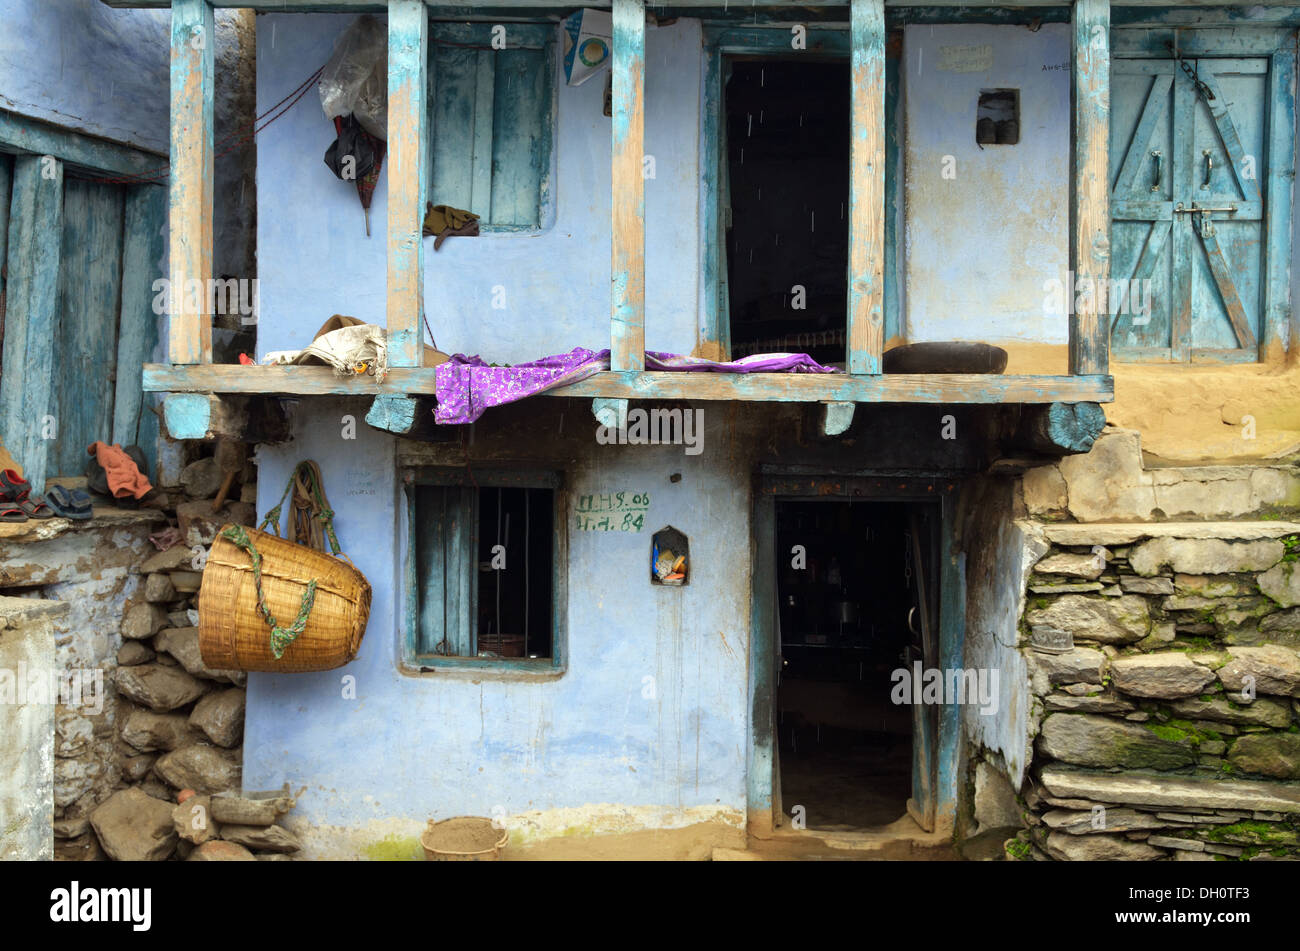 Blue home with basket hanging on the wall, Mana village, India Stock Photo